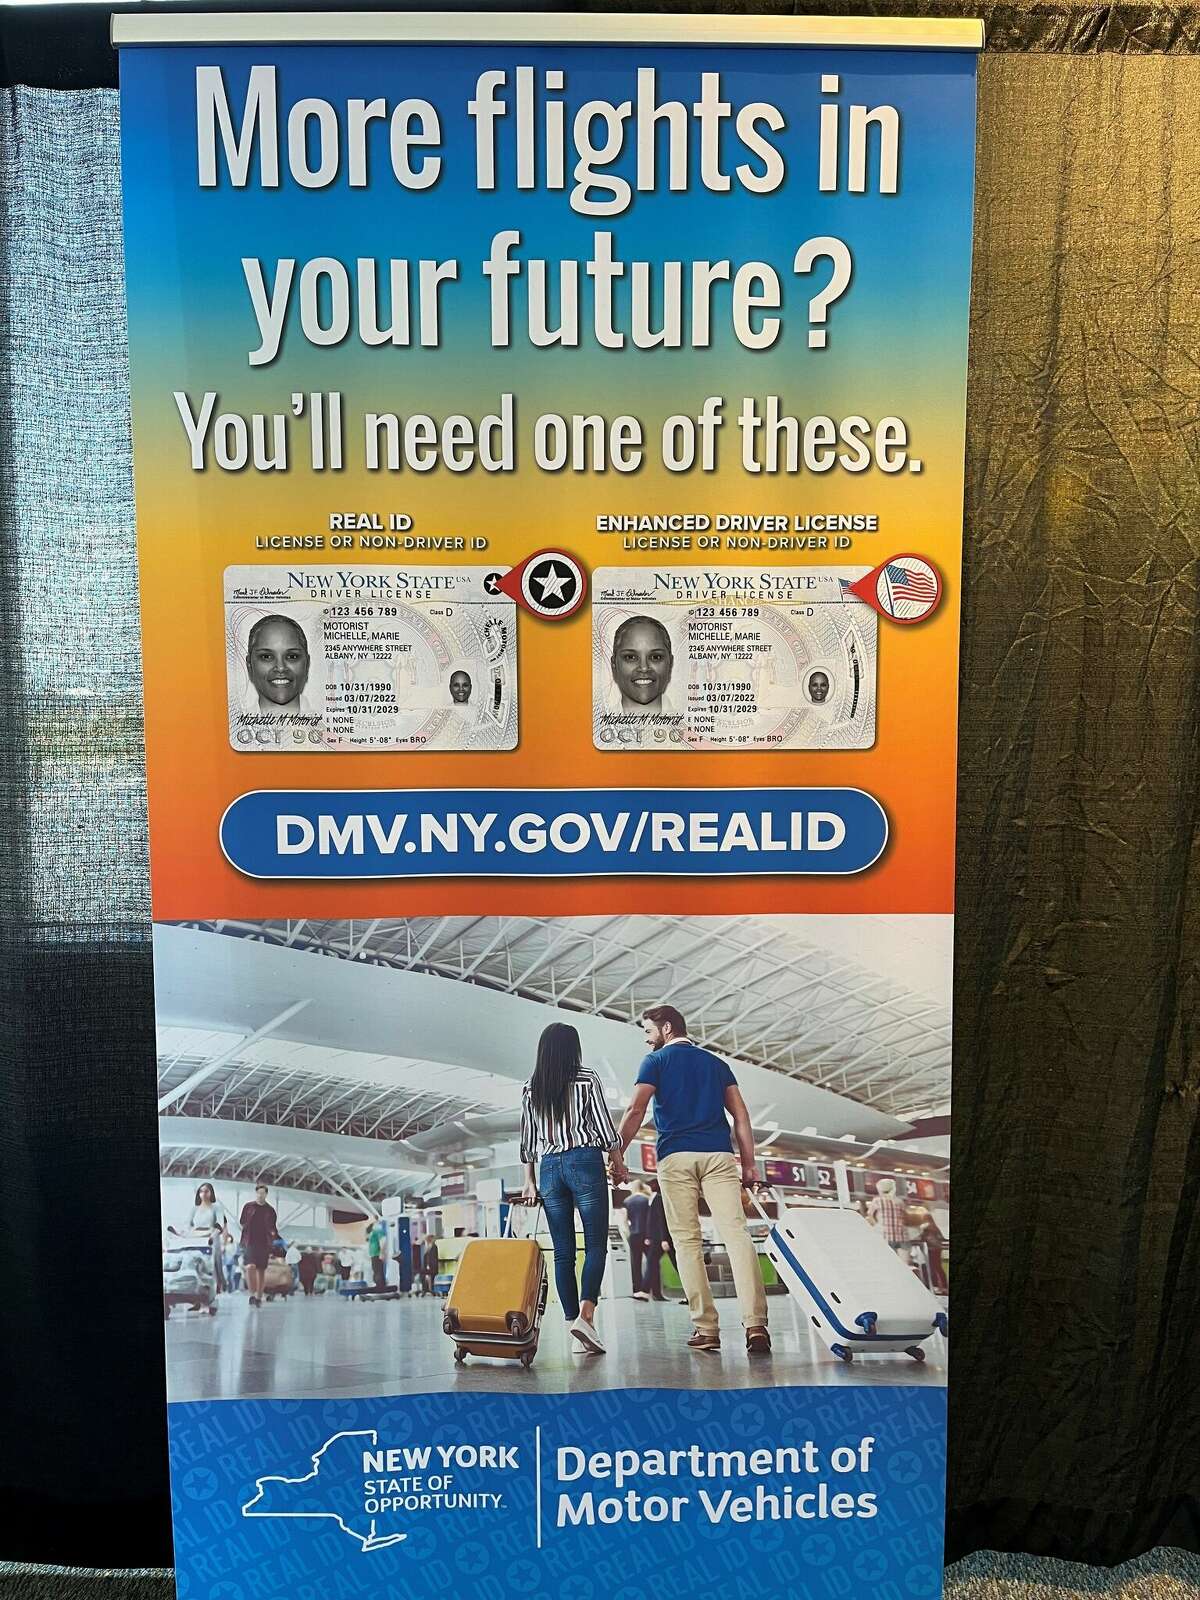 Albany International Airport will require travelers to have Real IDs to board domestic planes in 2023 in compliance with the federal Read ID Act. 